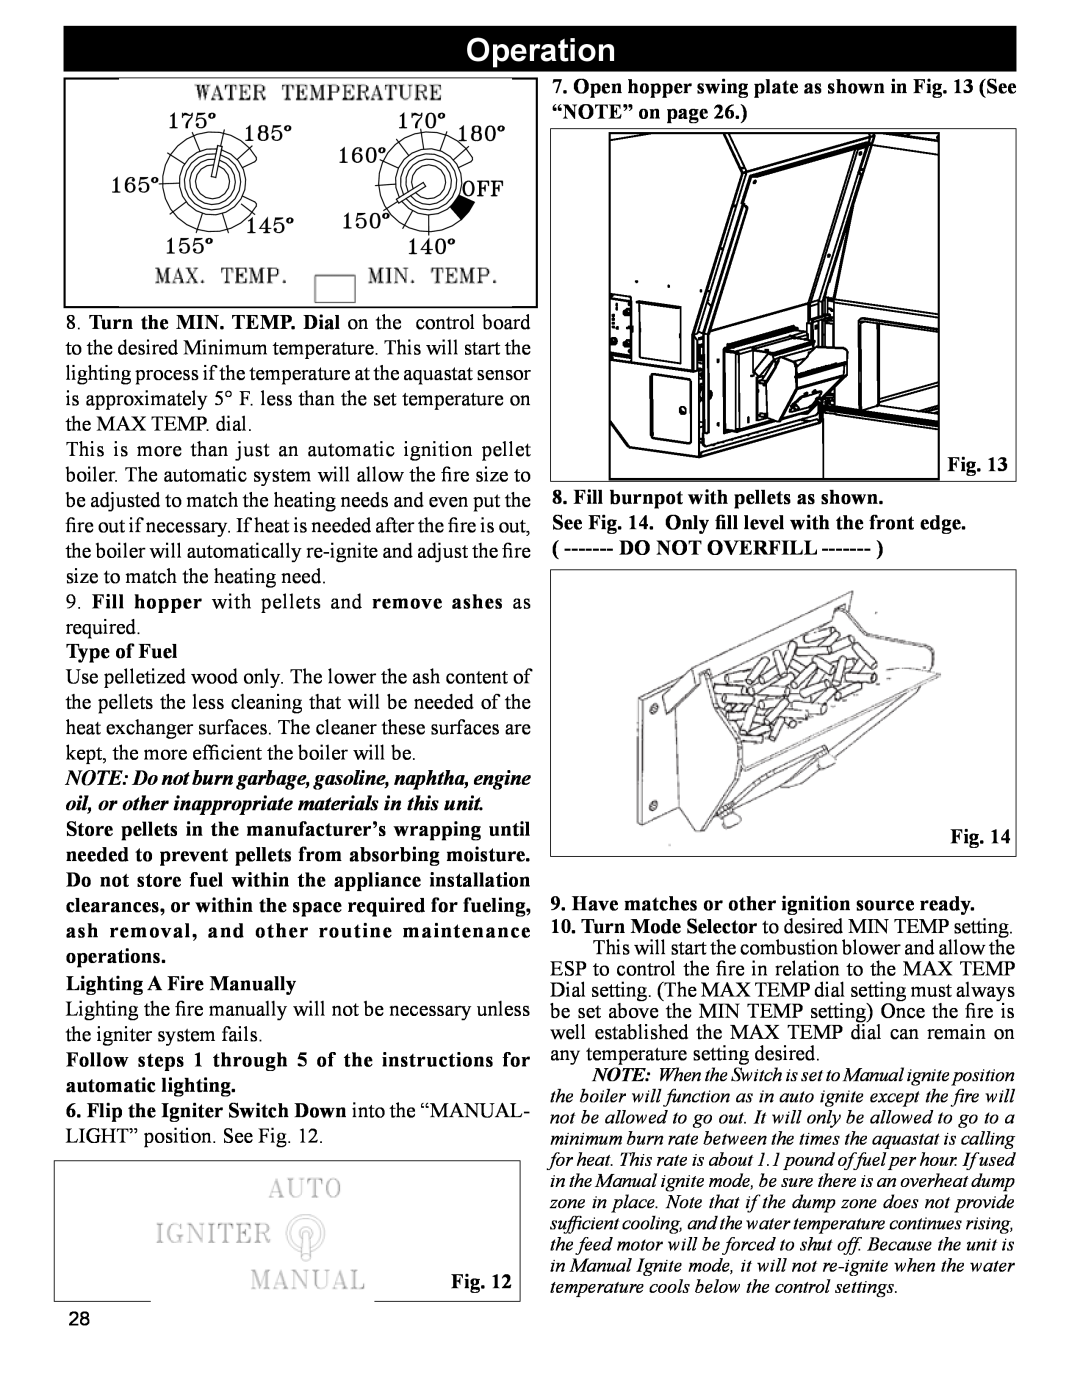 Hearth and Home Technologies BH 105 manual Operation, Fill hopper with pellets and remove ashes as required Type of Fuel 